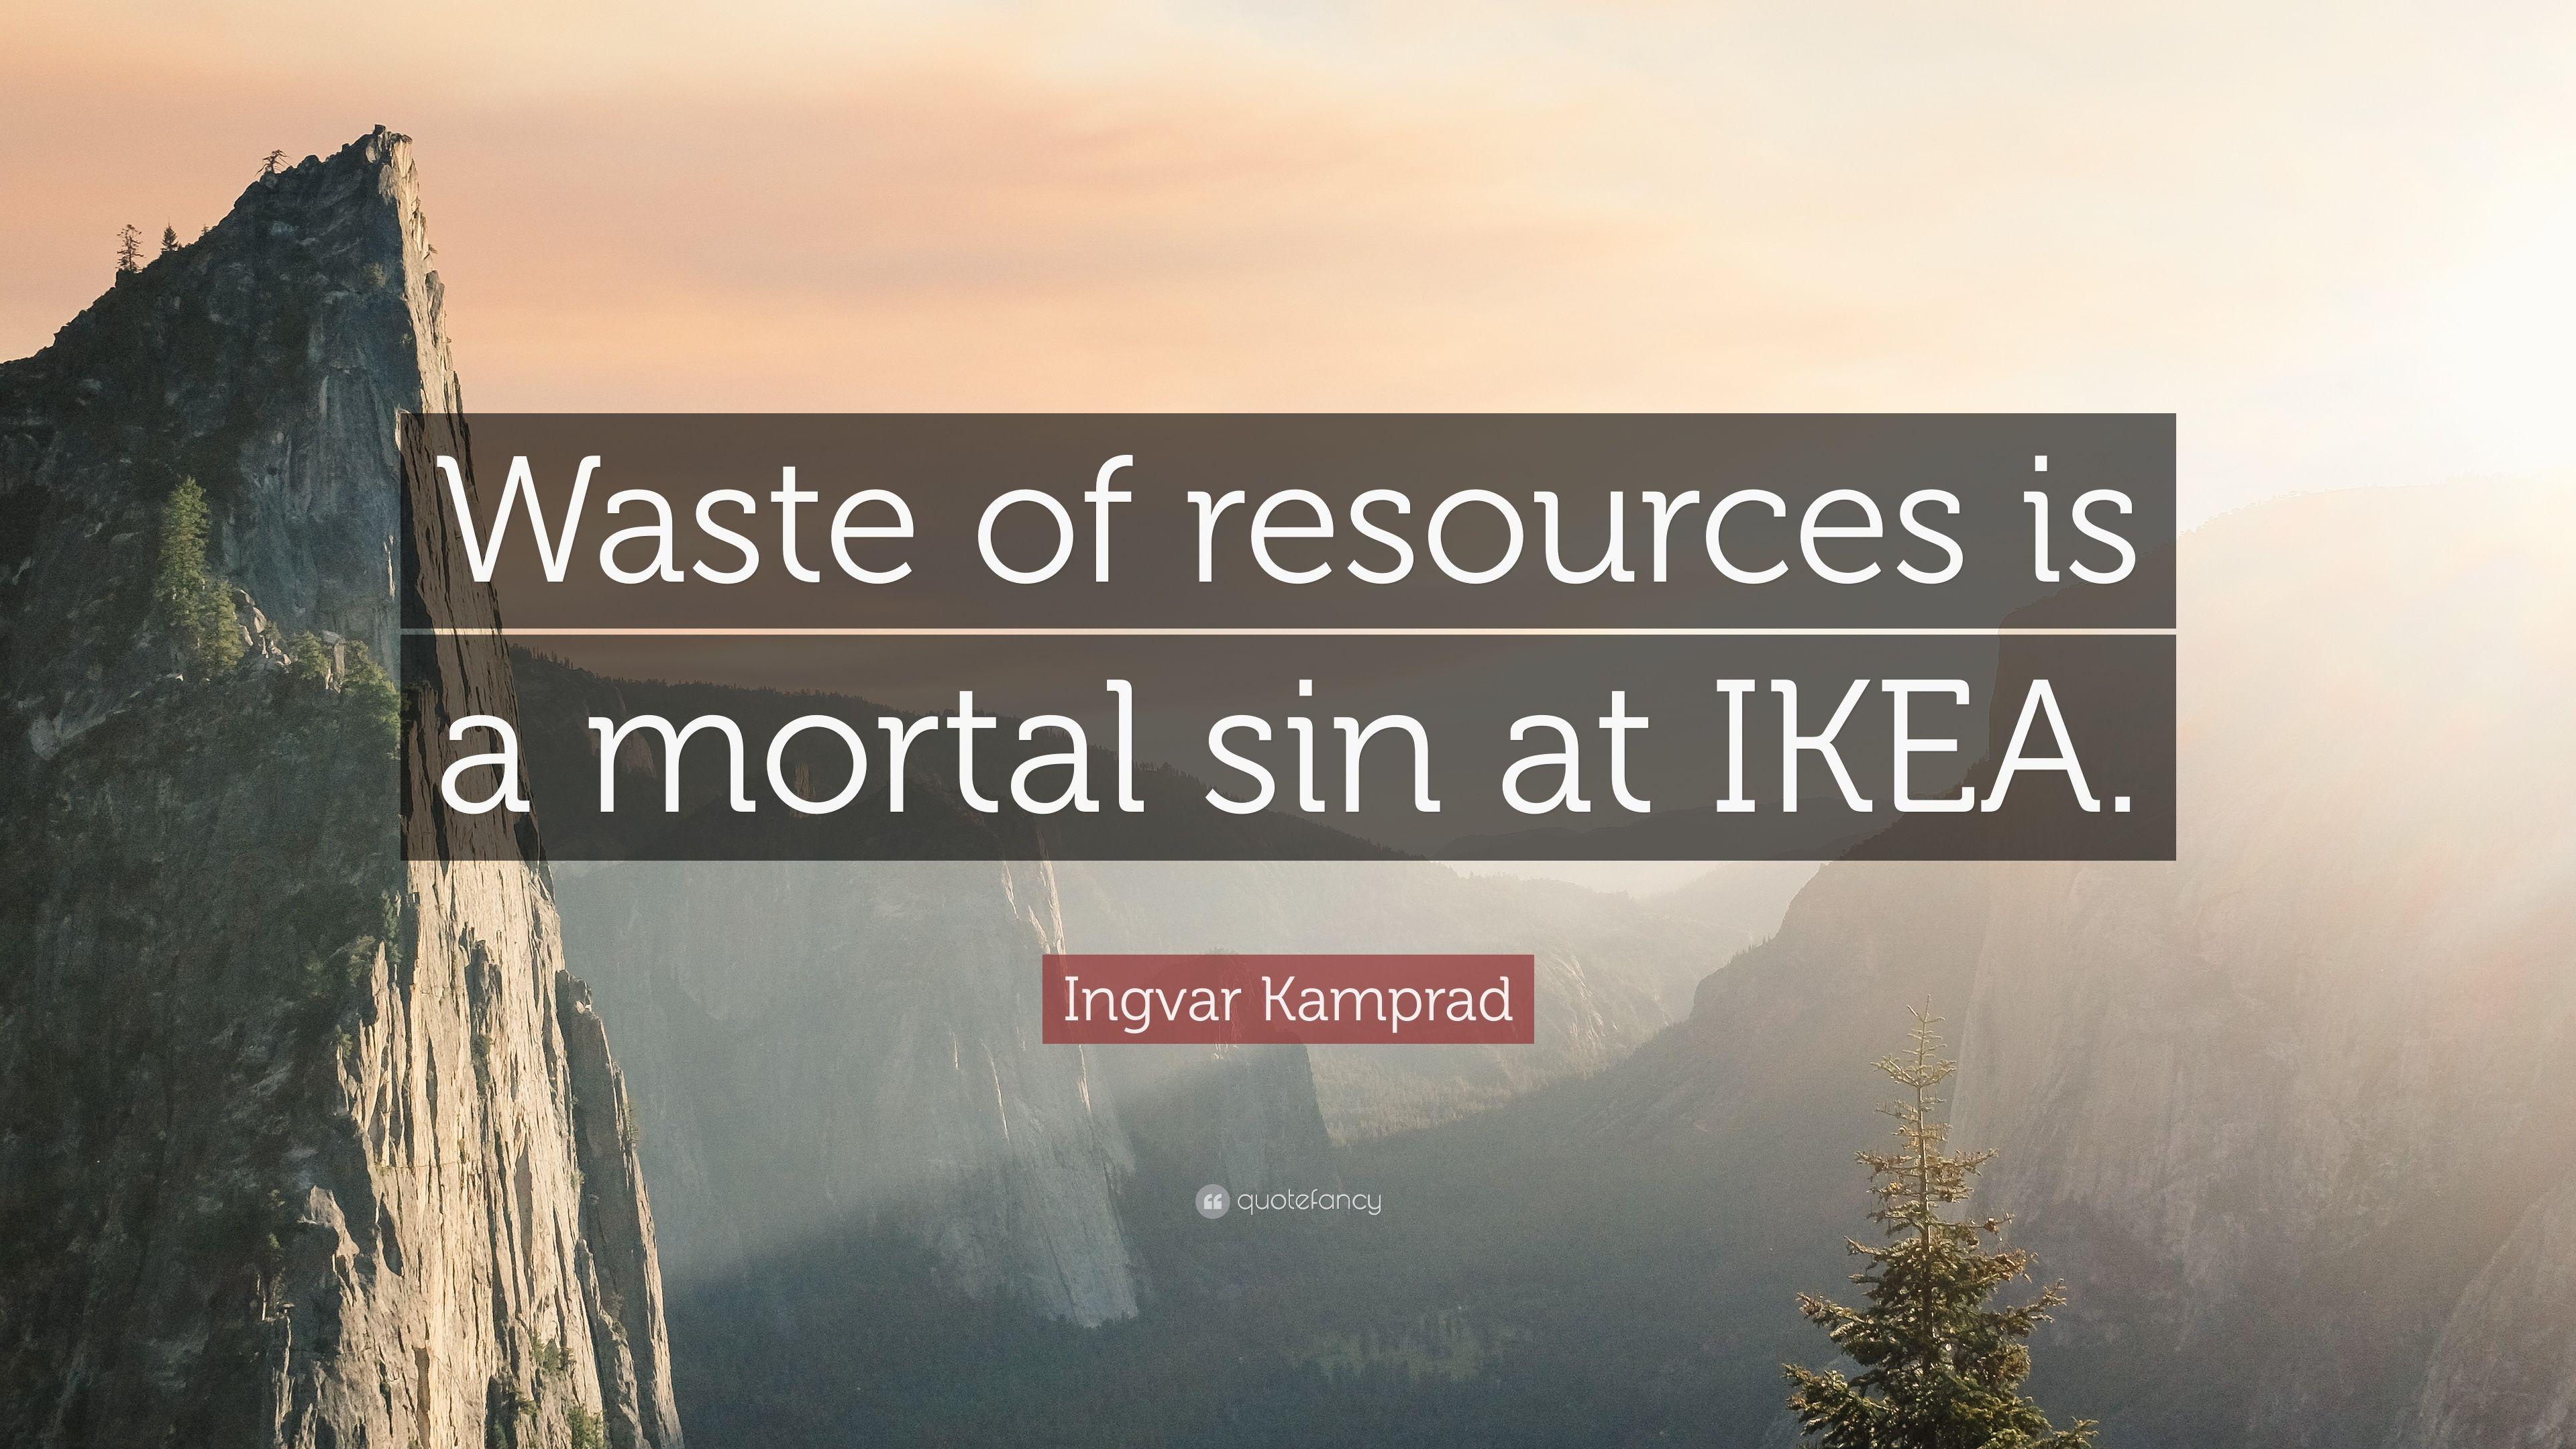 Ingvar Kamprad Quote: “Waste of resources is a mortal sin at IKEA